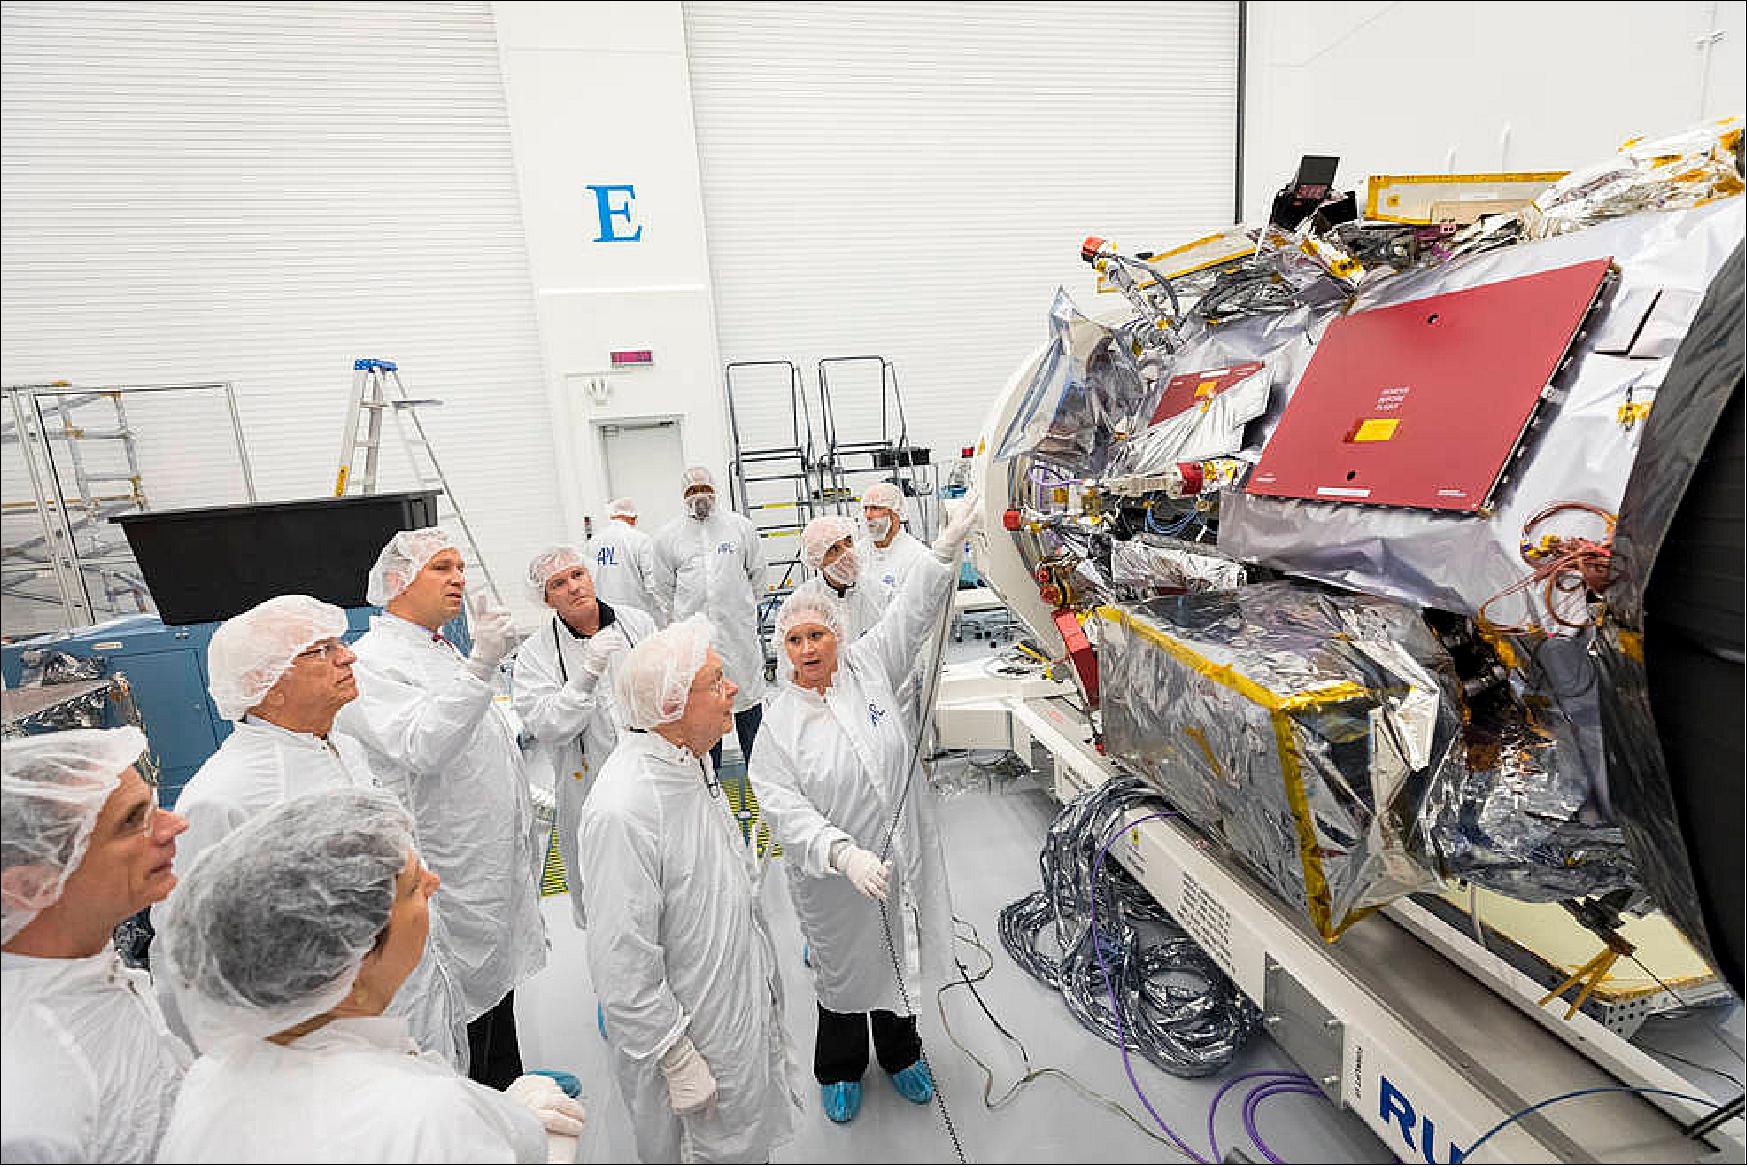 Figure 127: Eugene Parker, professor emeritus at the University of Chicago, visits the spacecraft that bears his name, NASA’s Parker Solar Probe, on Oct. 3, 2017. Engineers in the clean room at the Johns Hopkins Applied Physics Laboratory in Laurel, Maryland, where the probe was designed and built, point out the instruments that will collect data as the mission travels directly through the Sun’s atmosphere (image credit: NASA, JHU/APL)